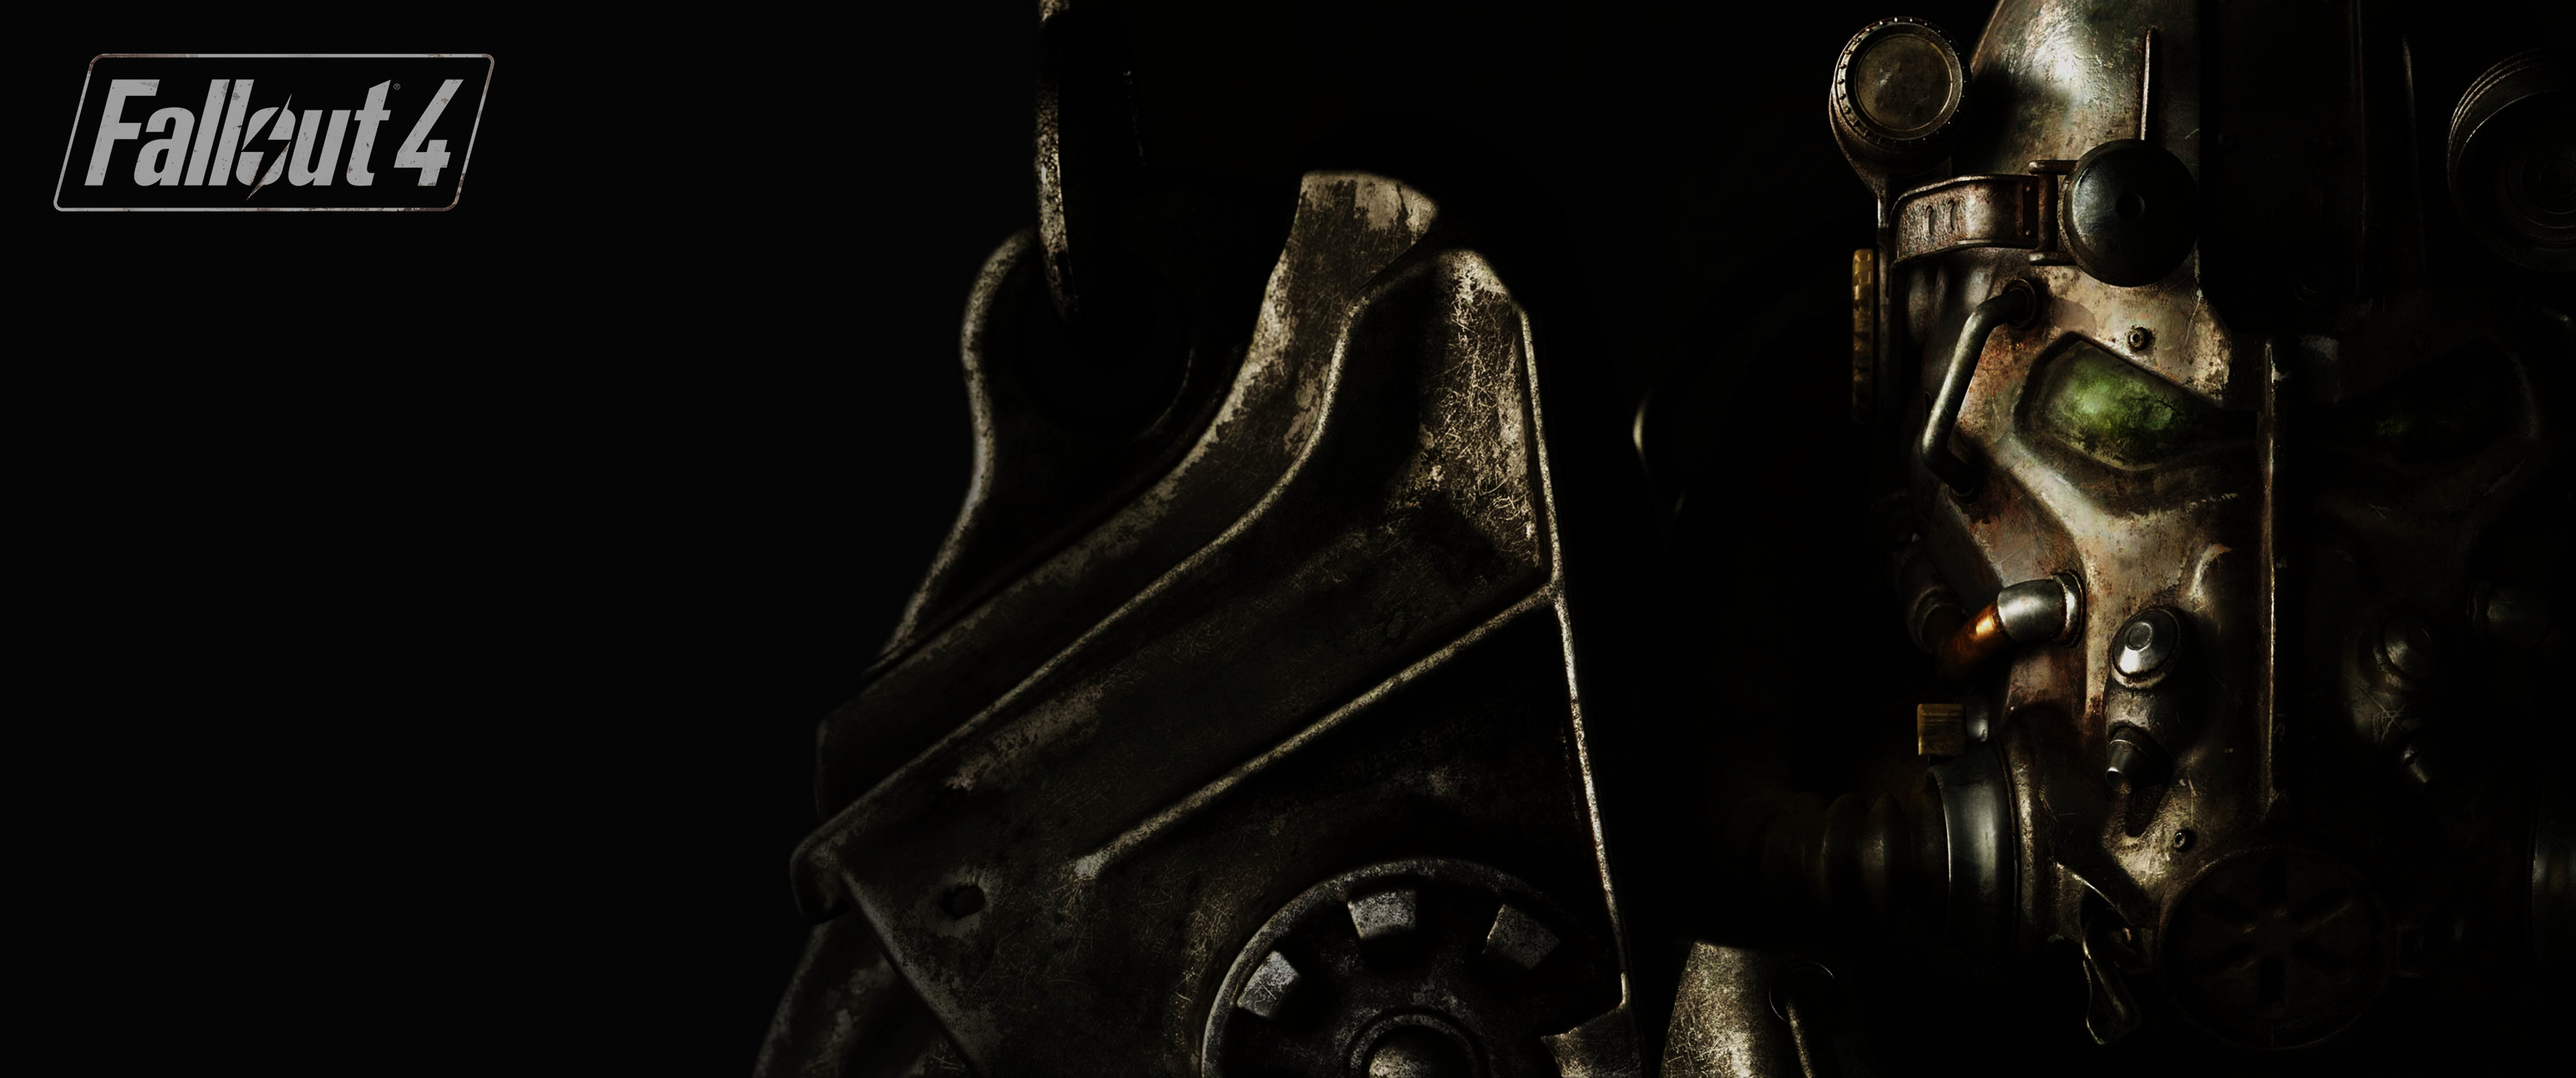 3440x1440 Couldnt find a Fallout 4 21:9 wallpaper so I made one ...